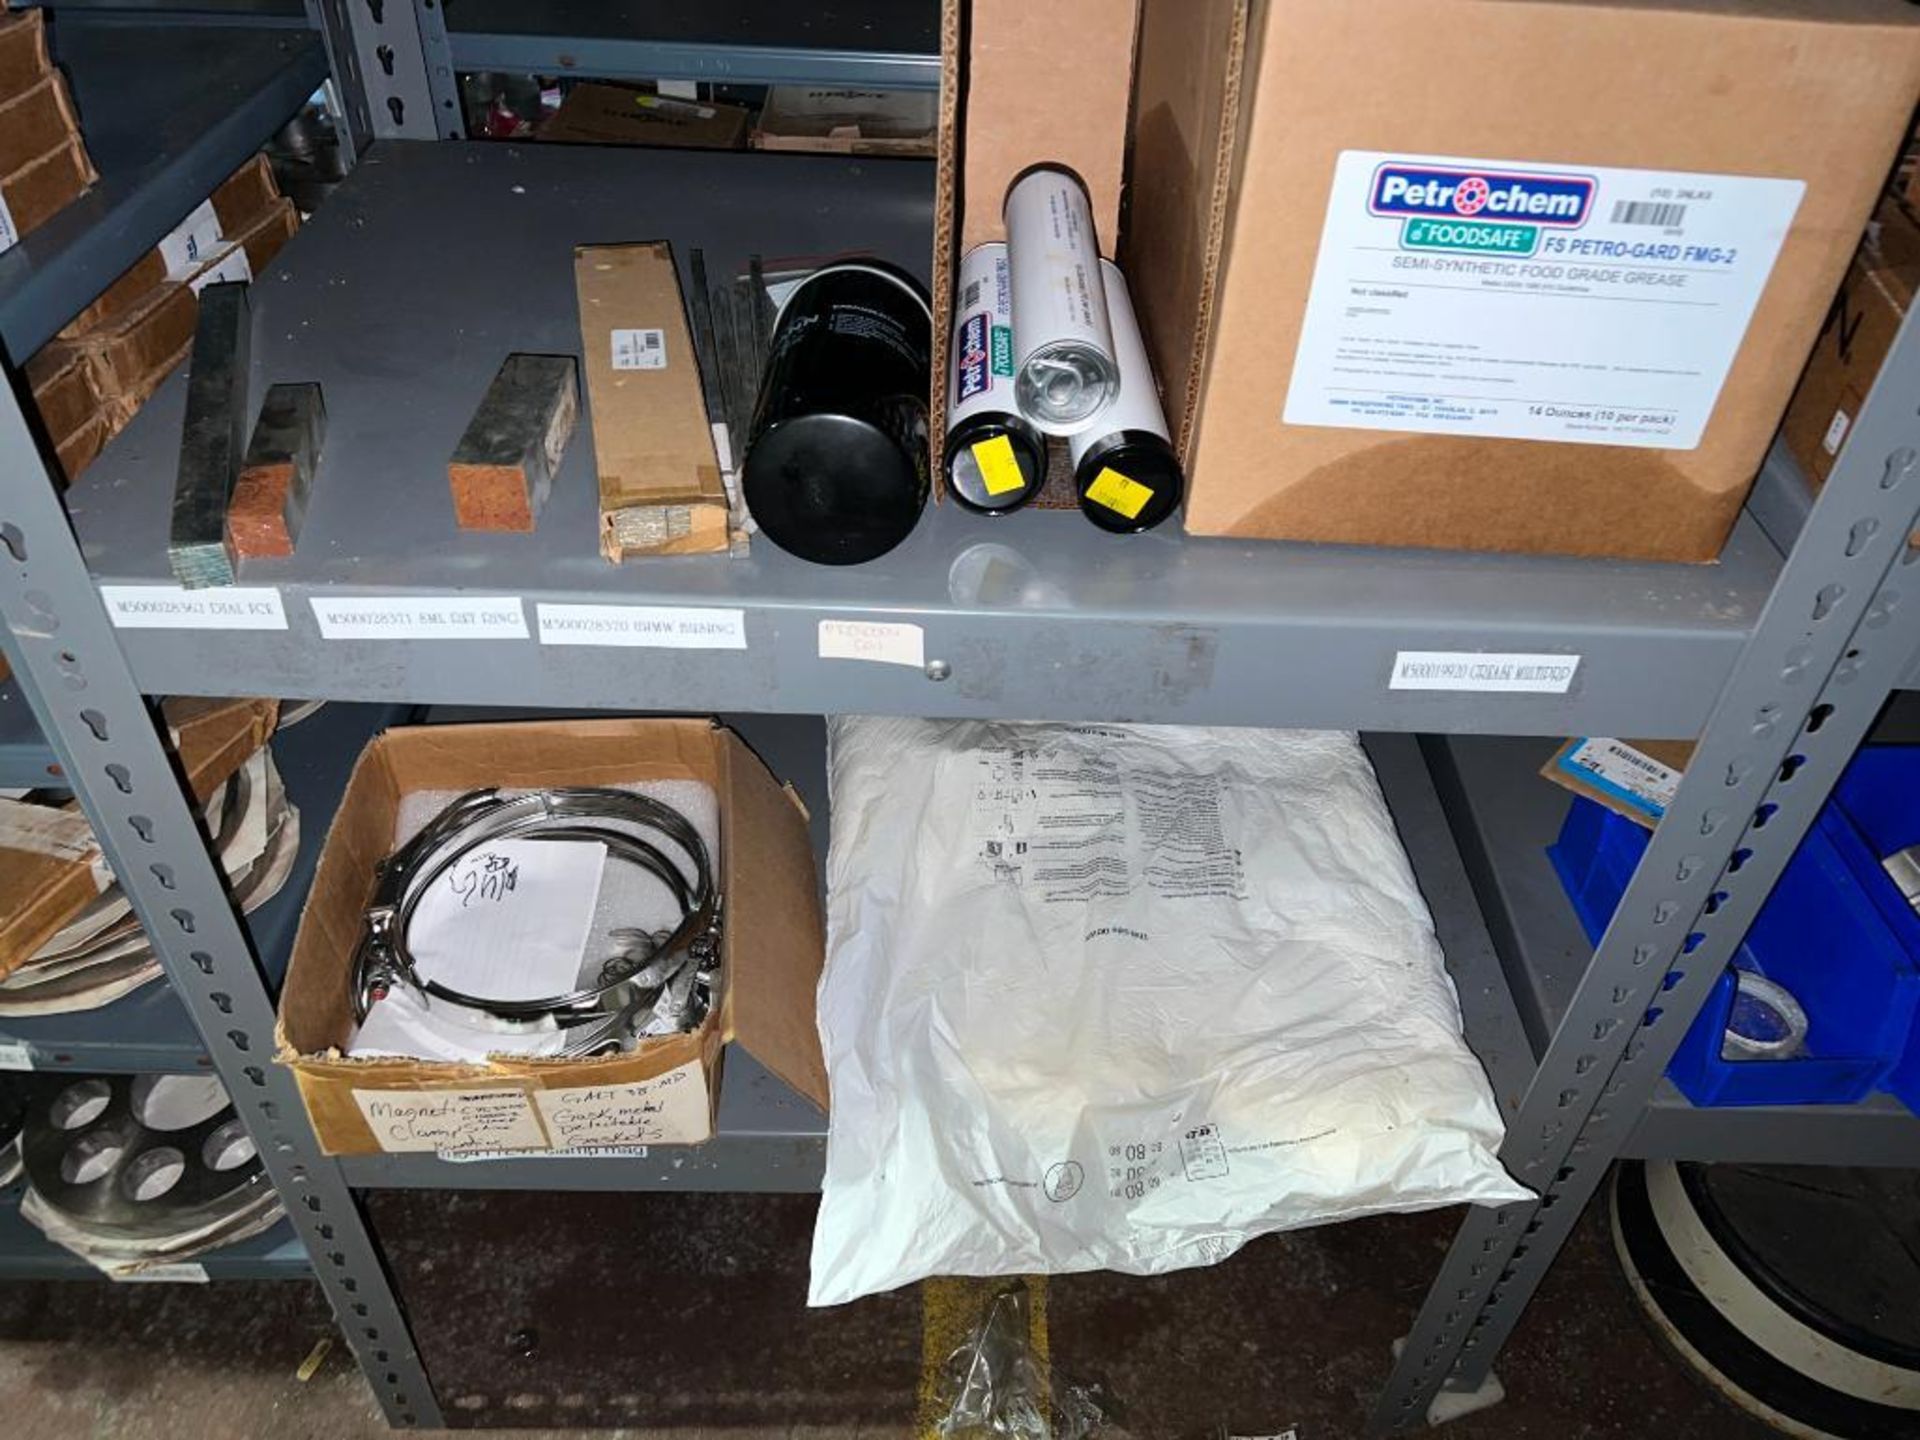 NEW Filters, Solar Valves, ARO Regulators and S/S Fittings (Shelves Not Included) - Rigging Fee: $20 - Image 6 of 6